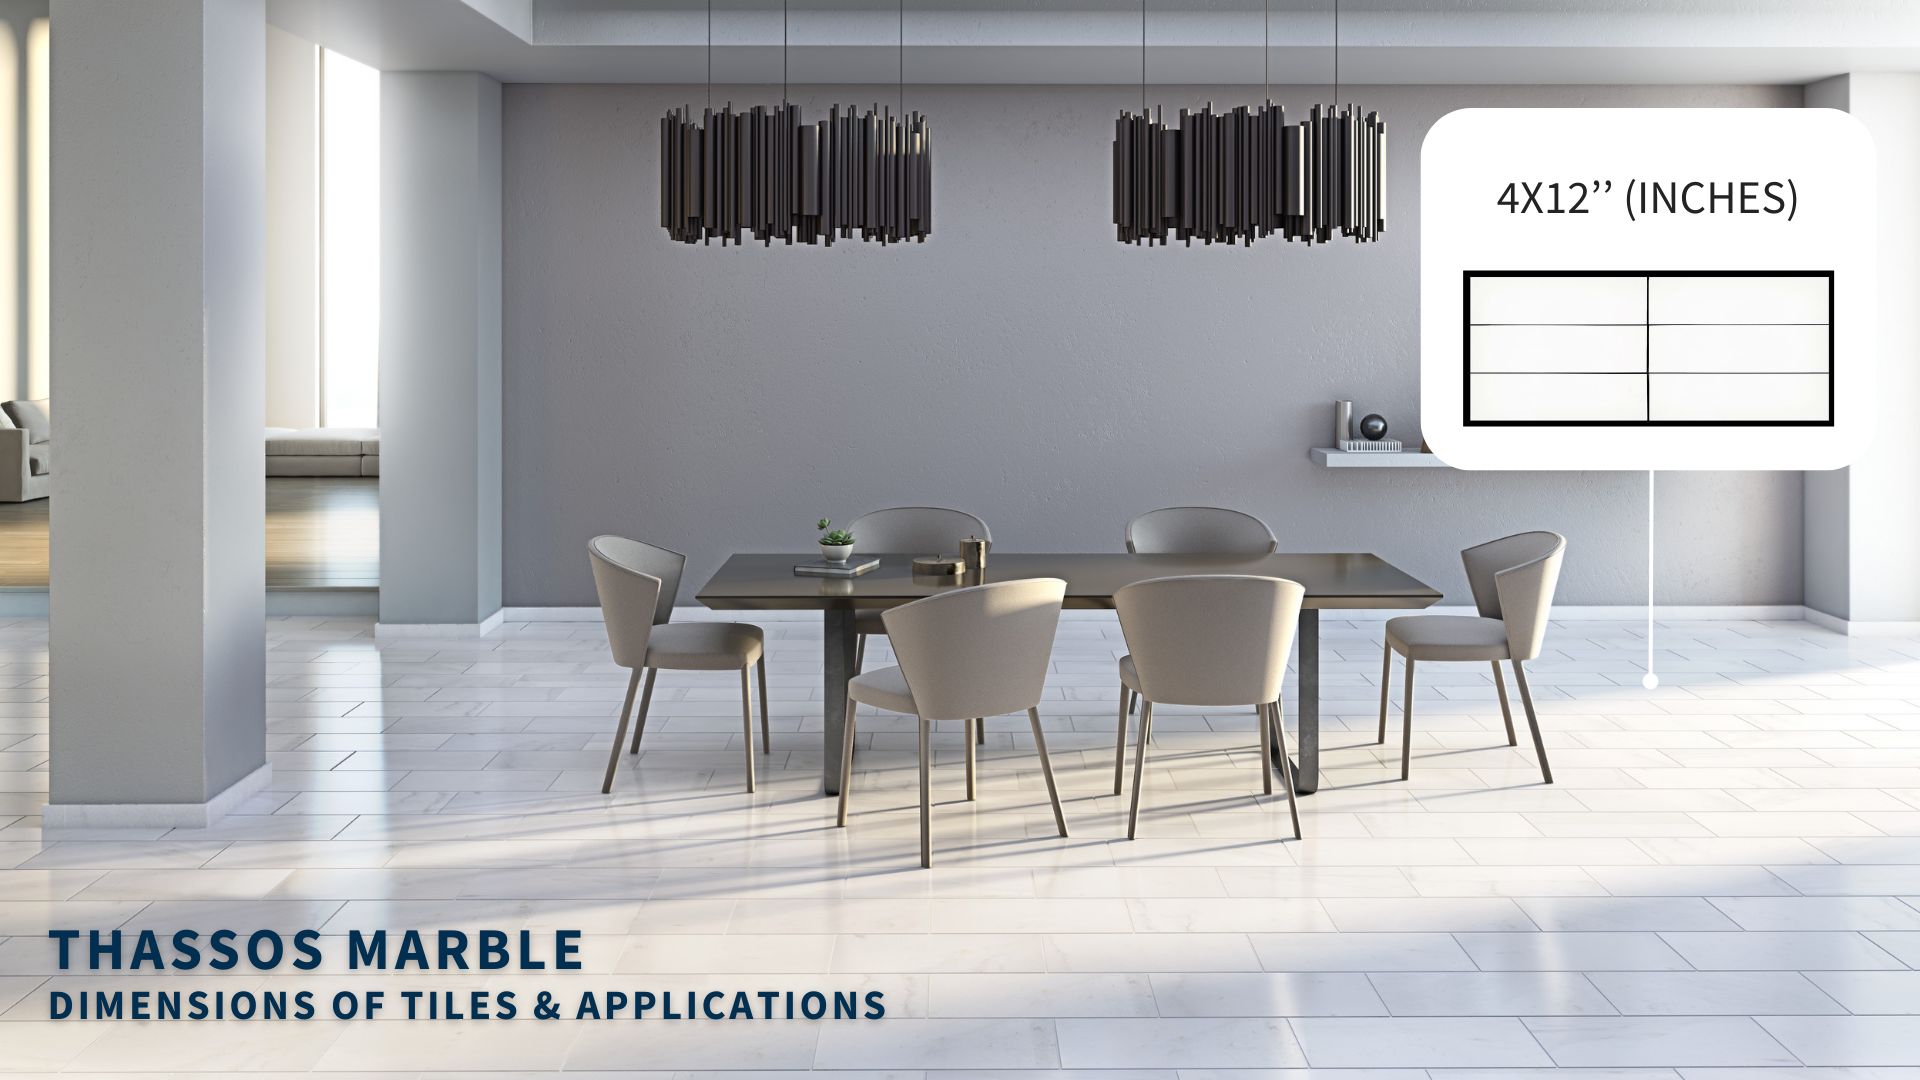 Dining room rendering to show the 4x12 dimension of Thassos marble tiles applied